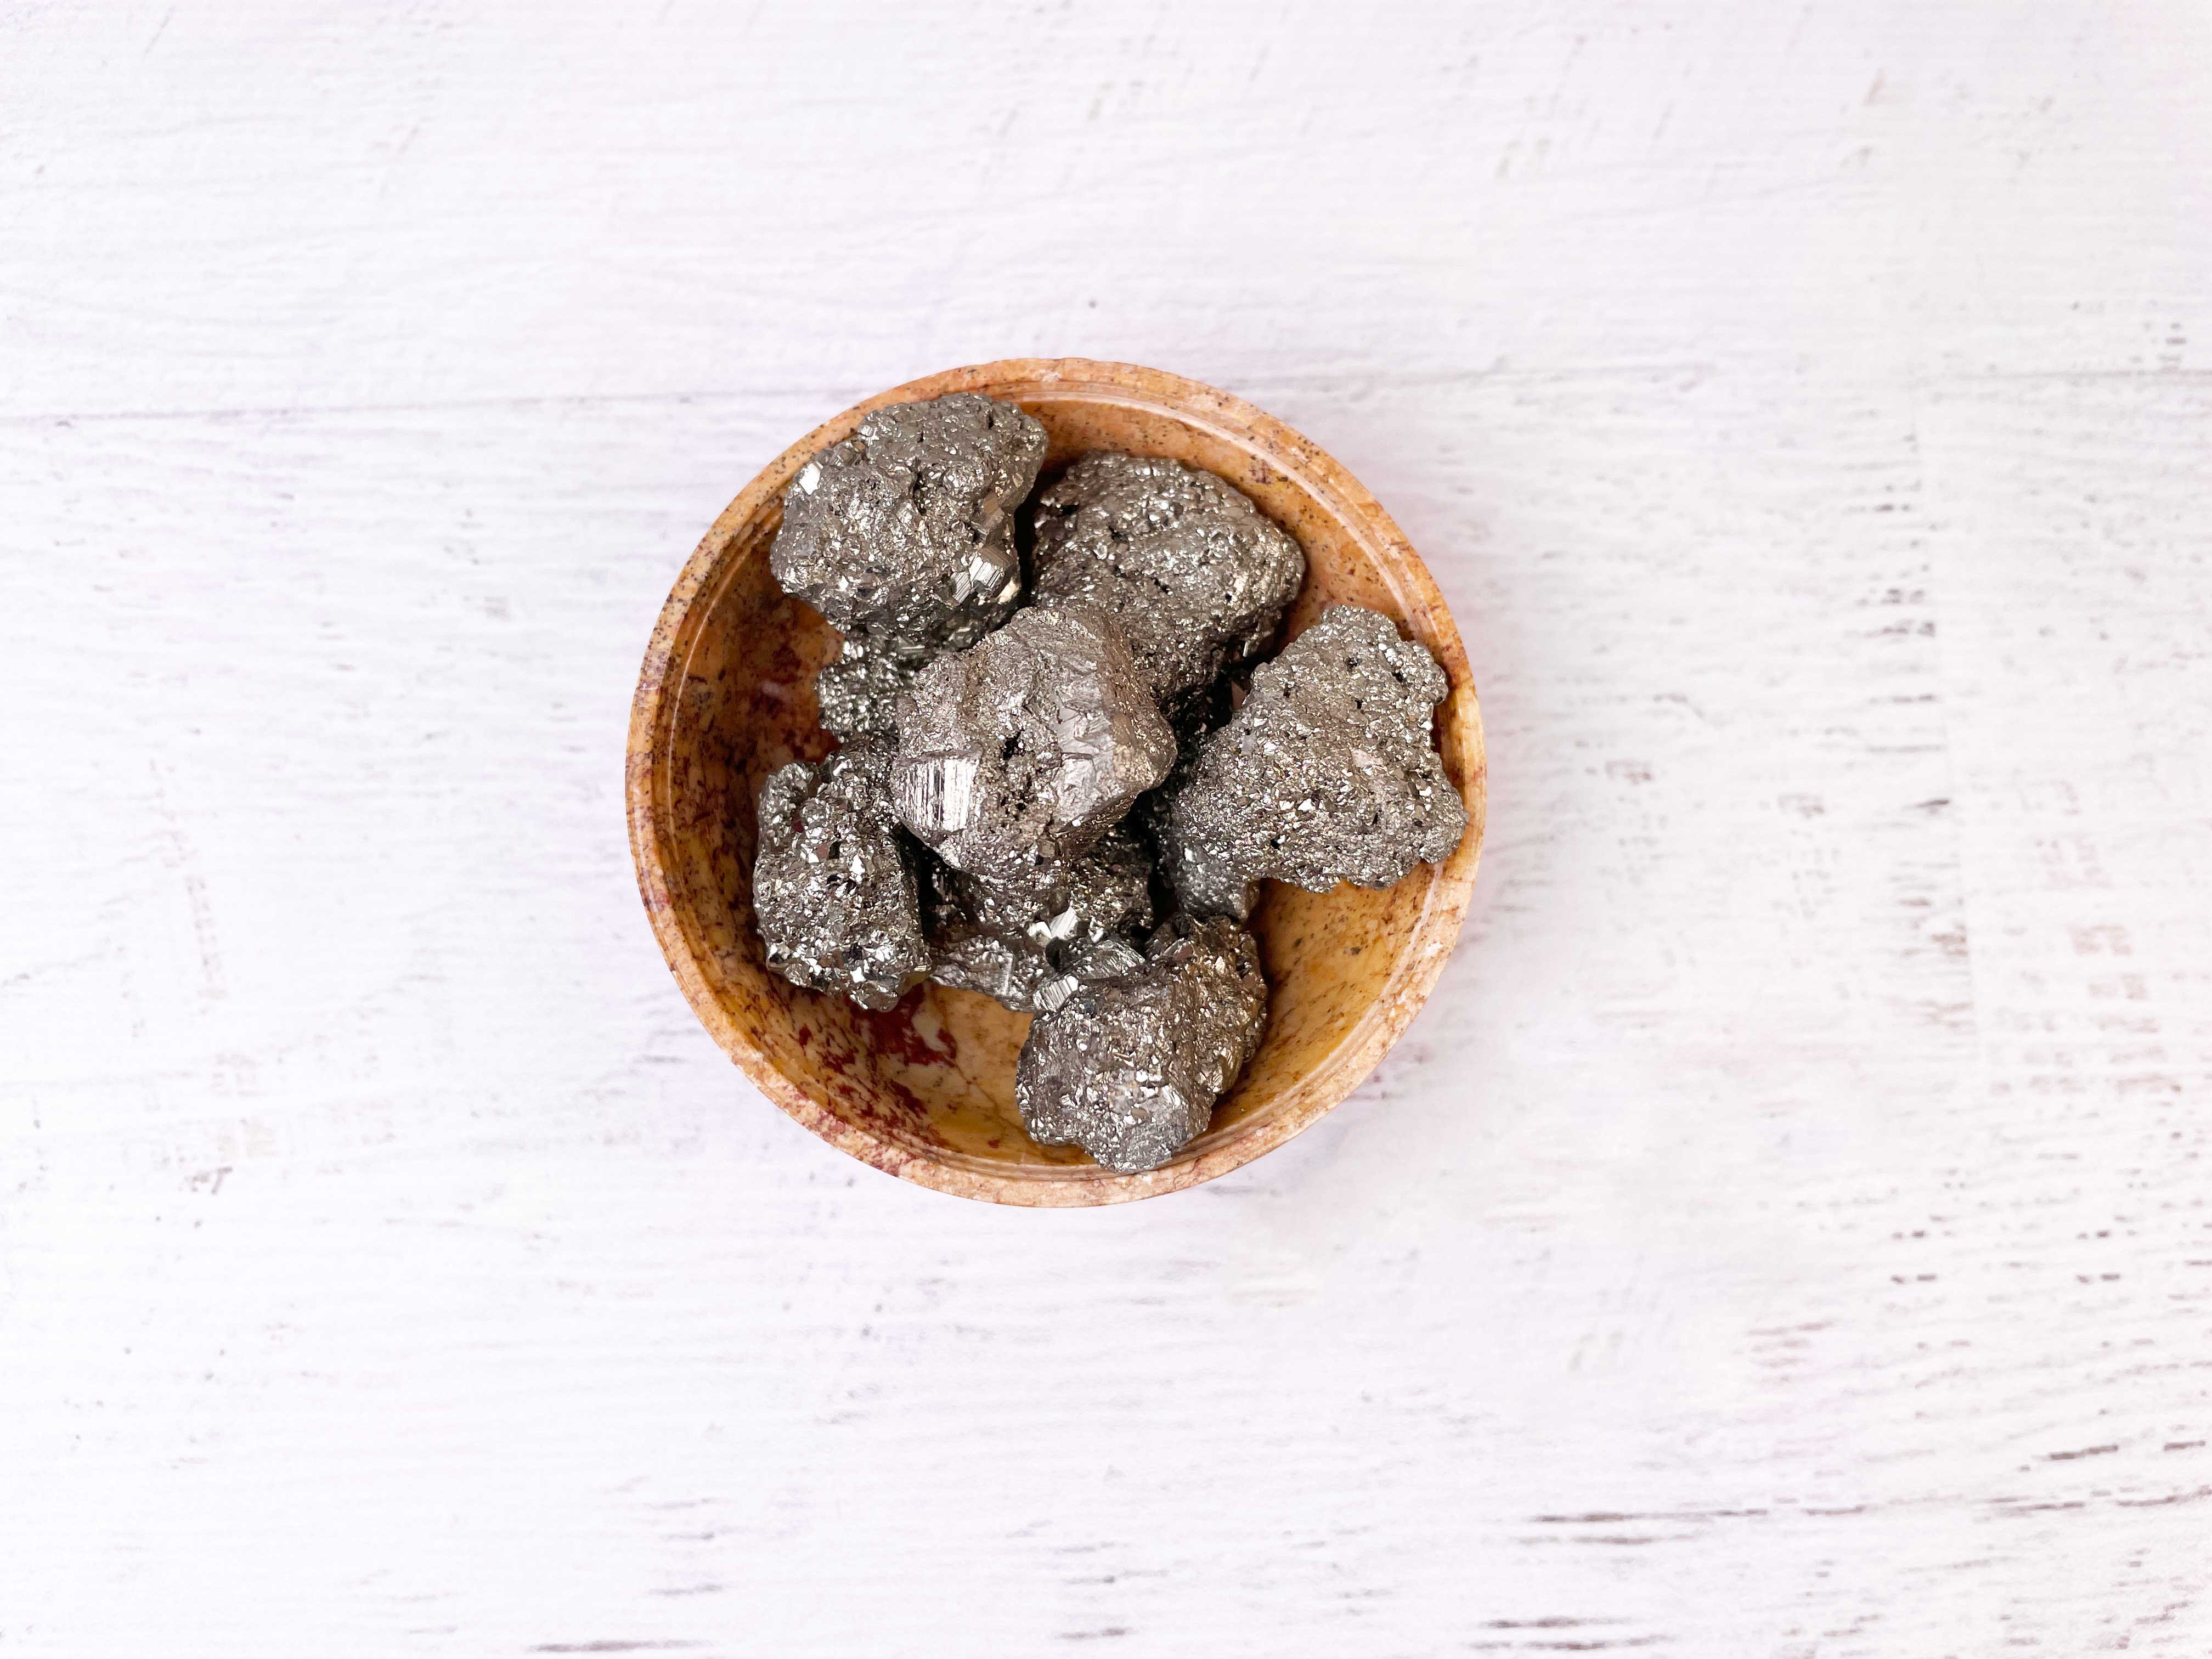 Buy Online Latest and Unique AA Pyrite Crystal Cluster - Wealth, Luck, Abundance, "Fool's Gold" | Shop Best Spiritual Items - The Mystical Ritual